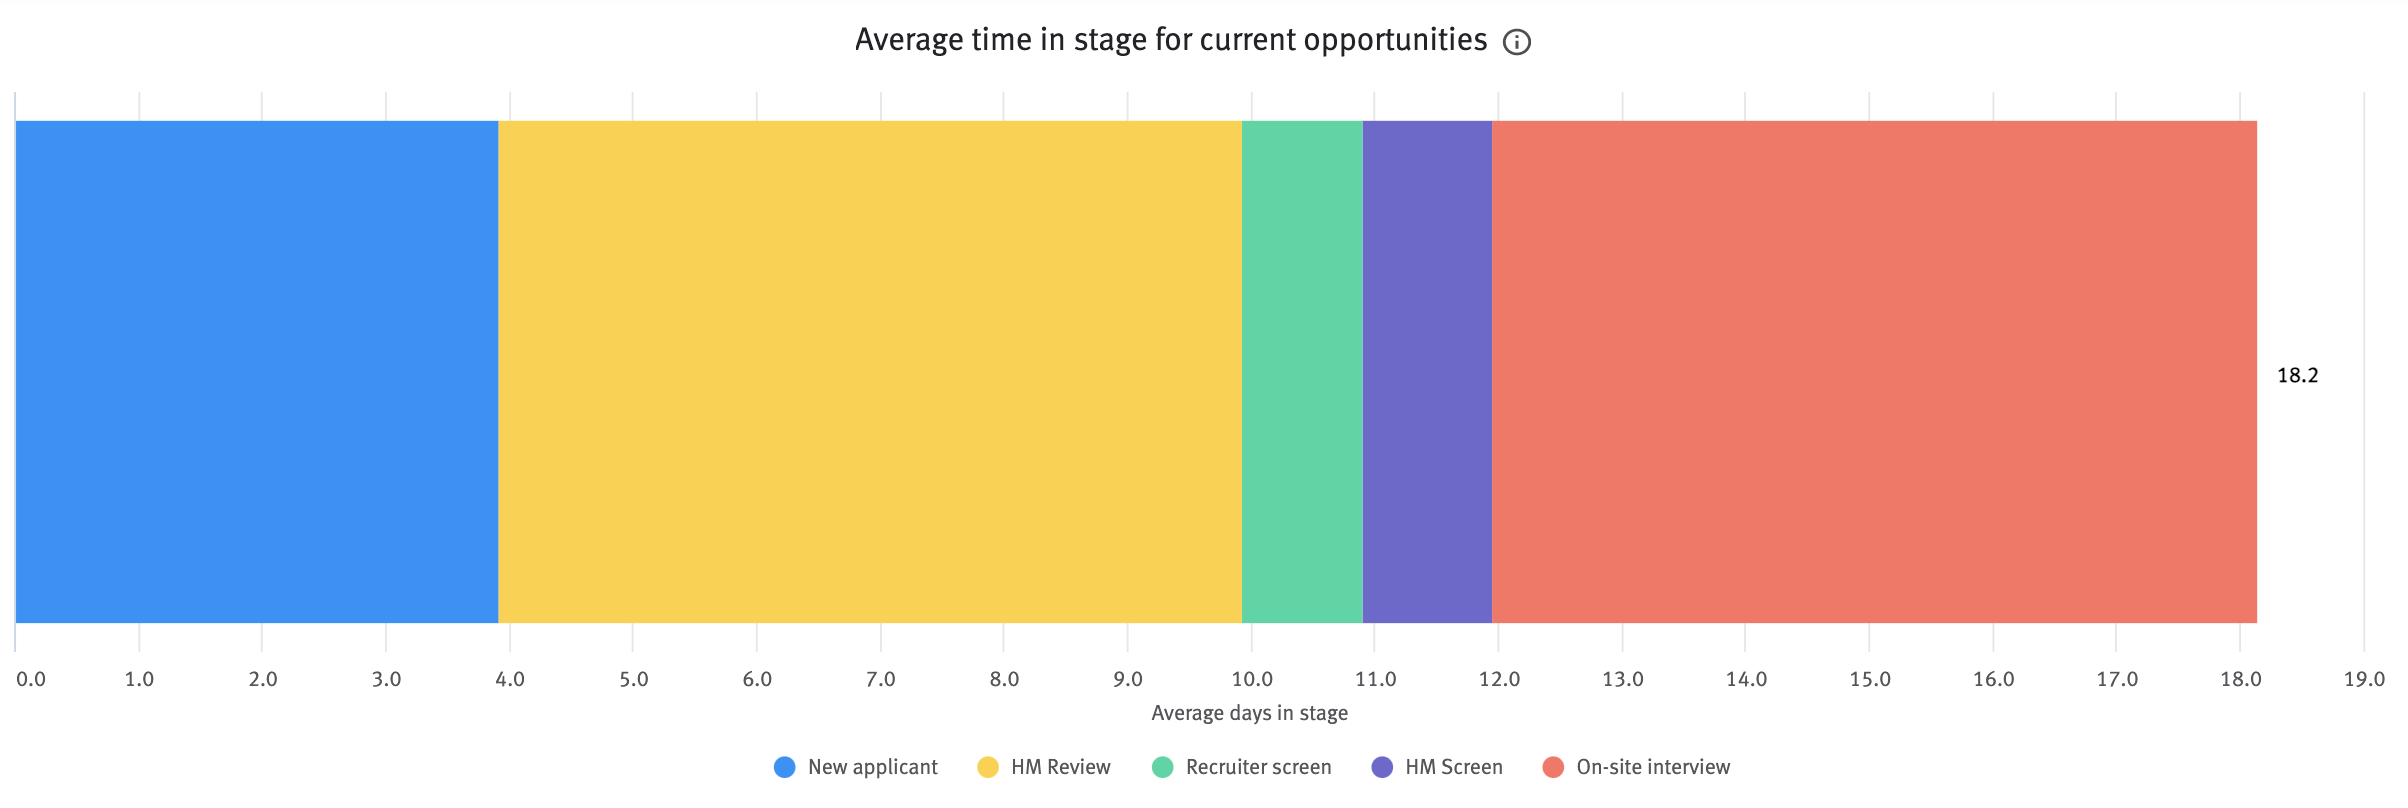 Average time in stage for current opportunities chart